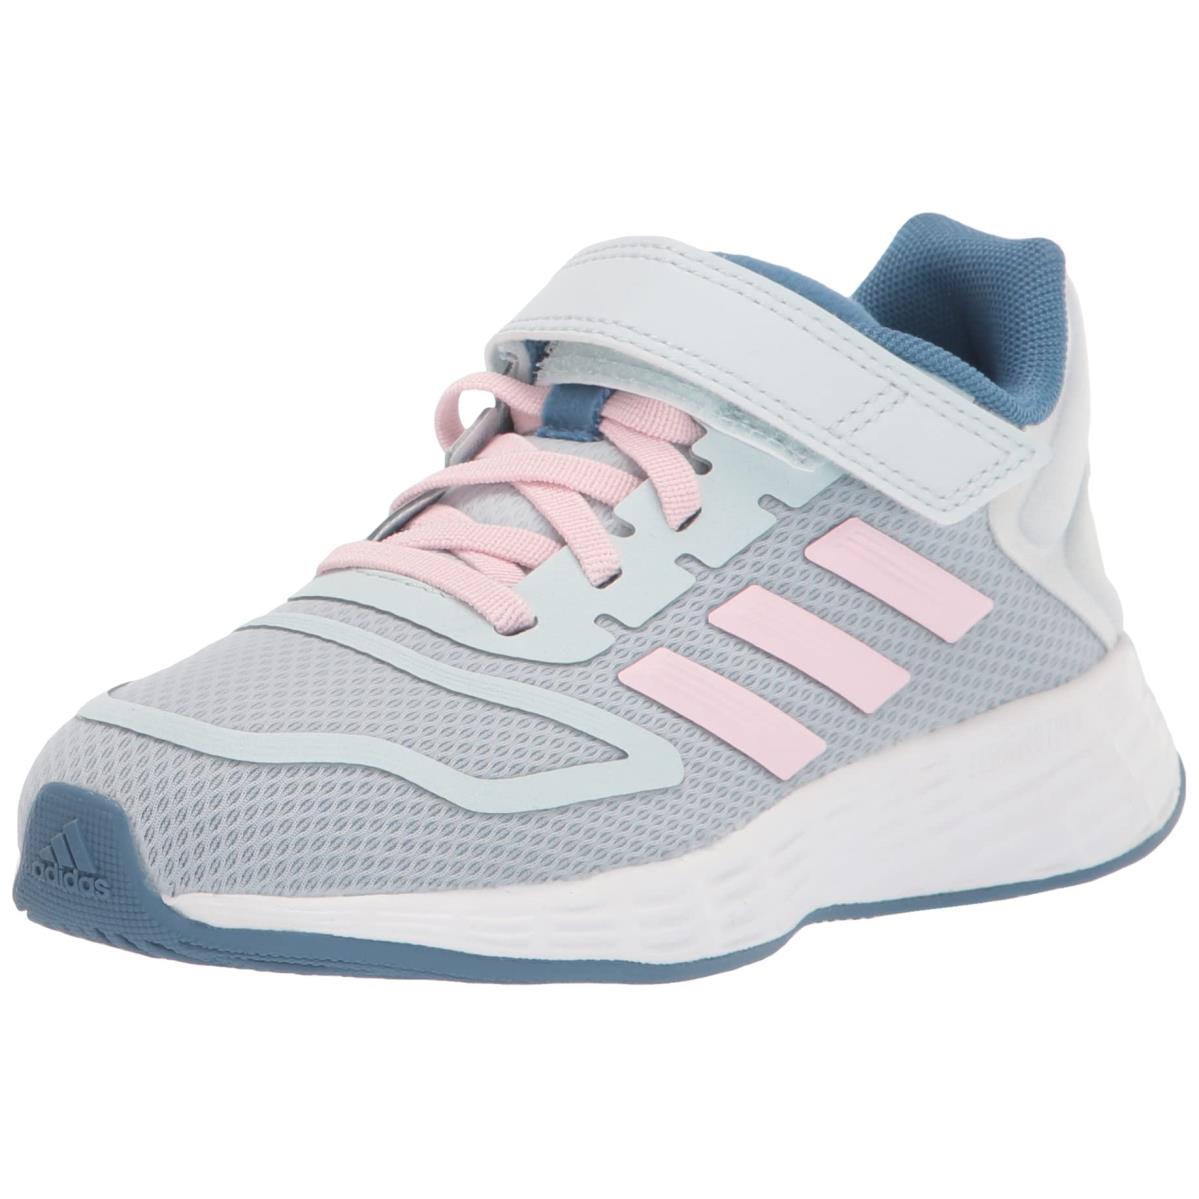 Adidas Unisex-child Duramo 10 Running Shoes Littl Blue Tint/Clear Pink/Altered Blue (Elastic)